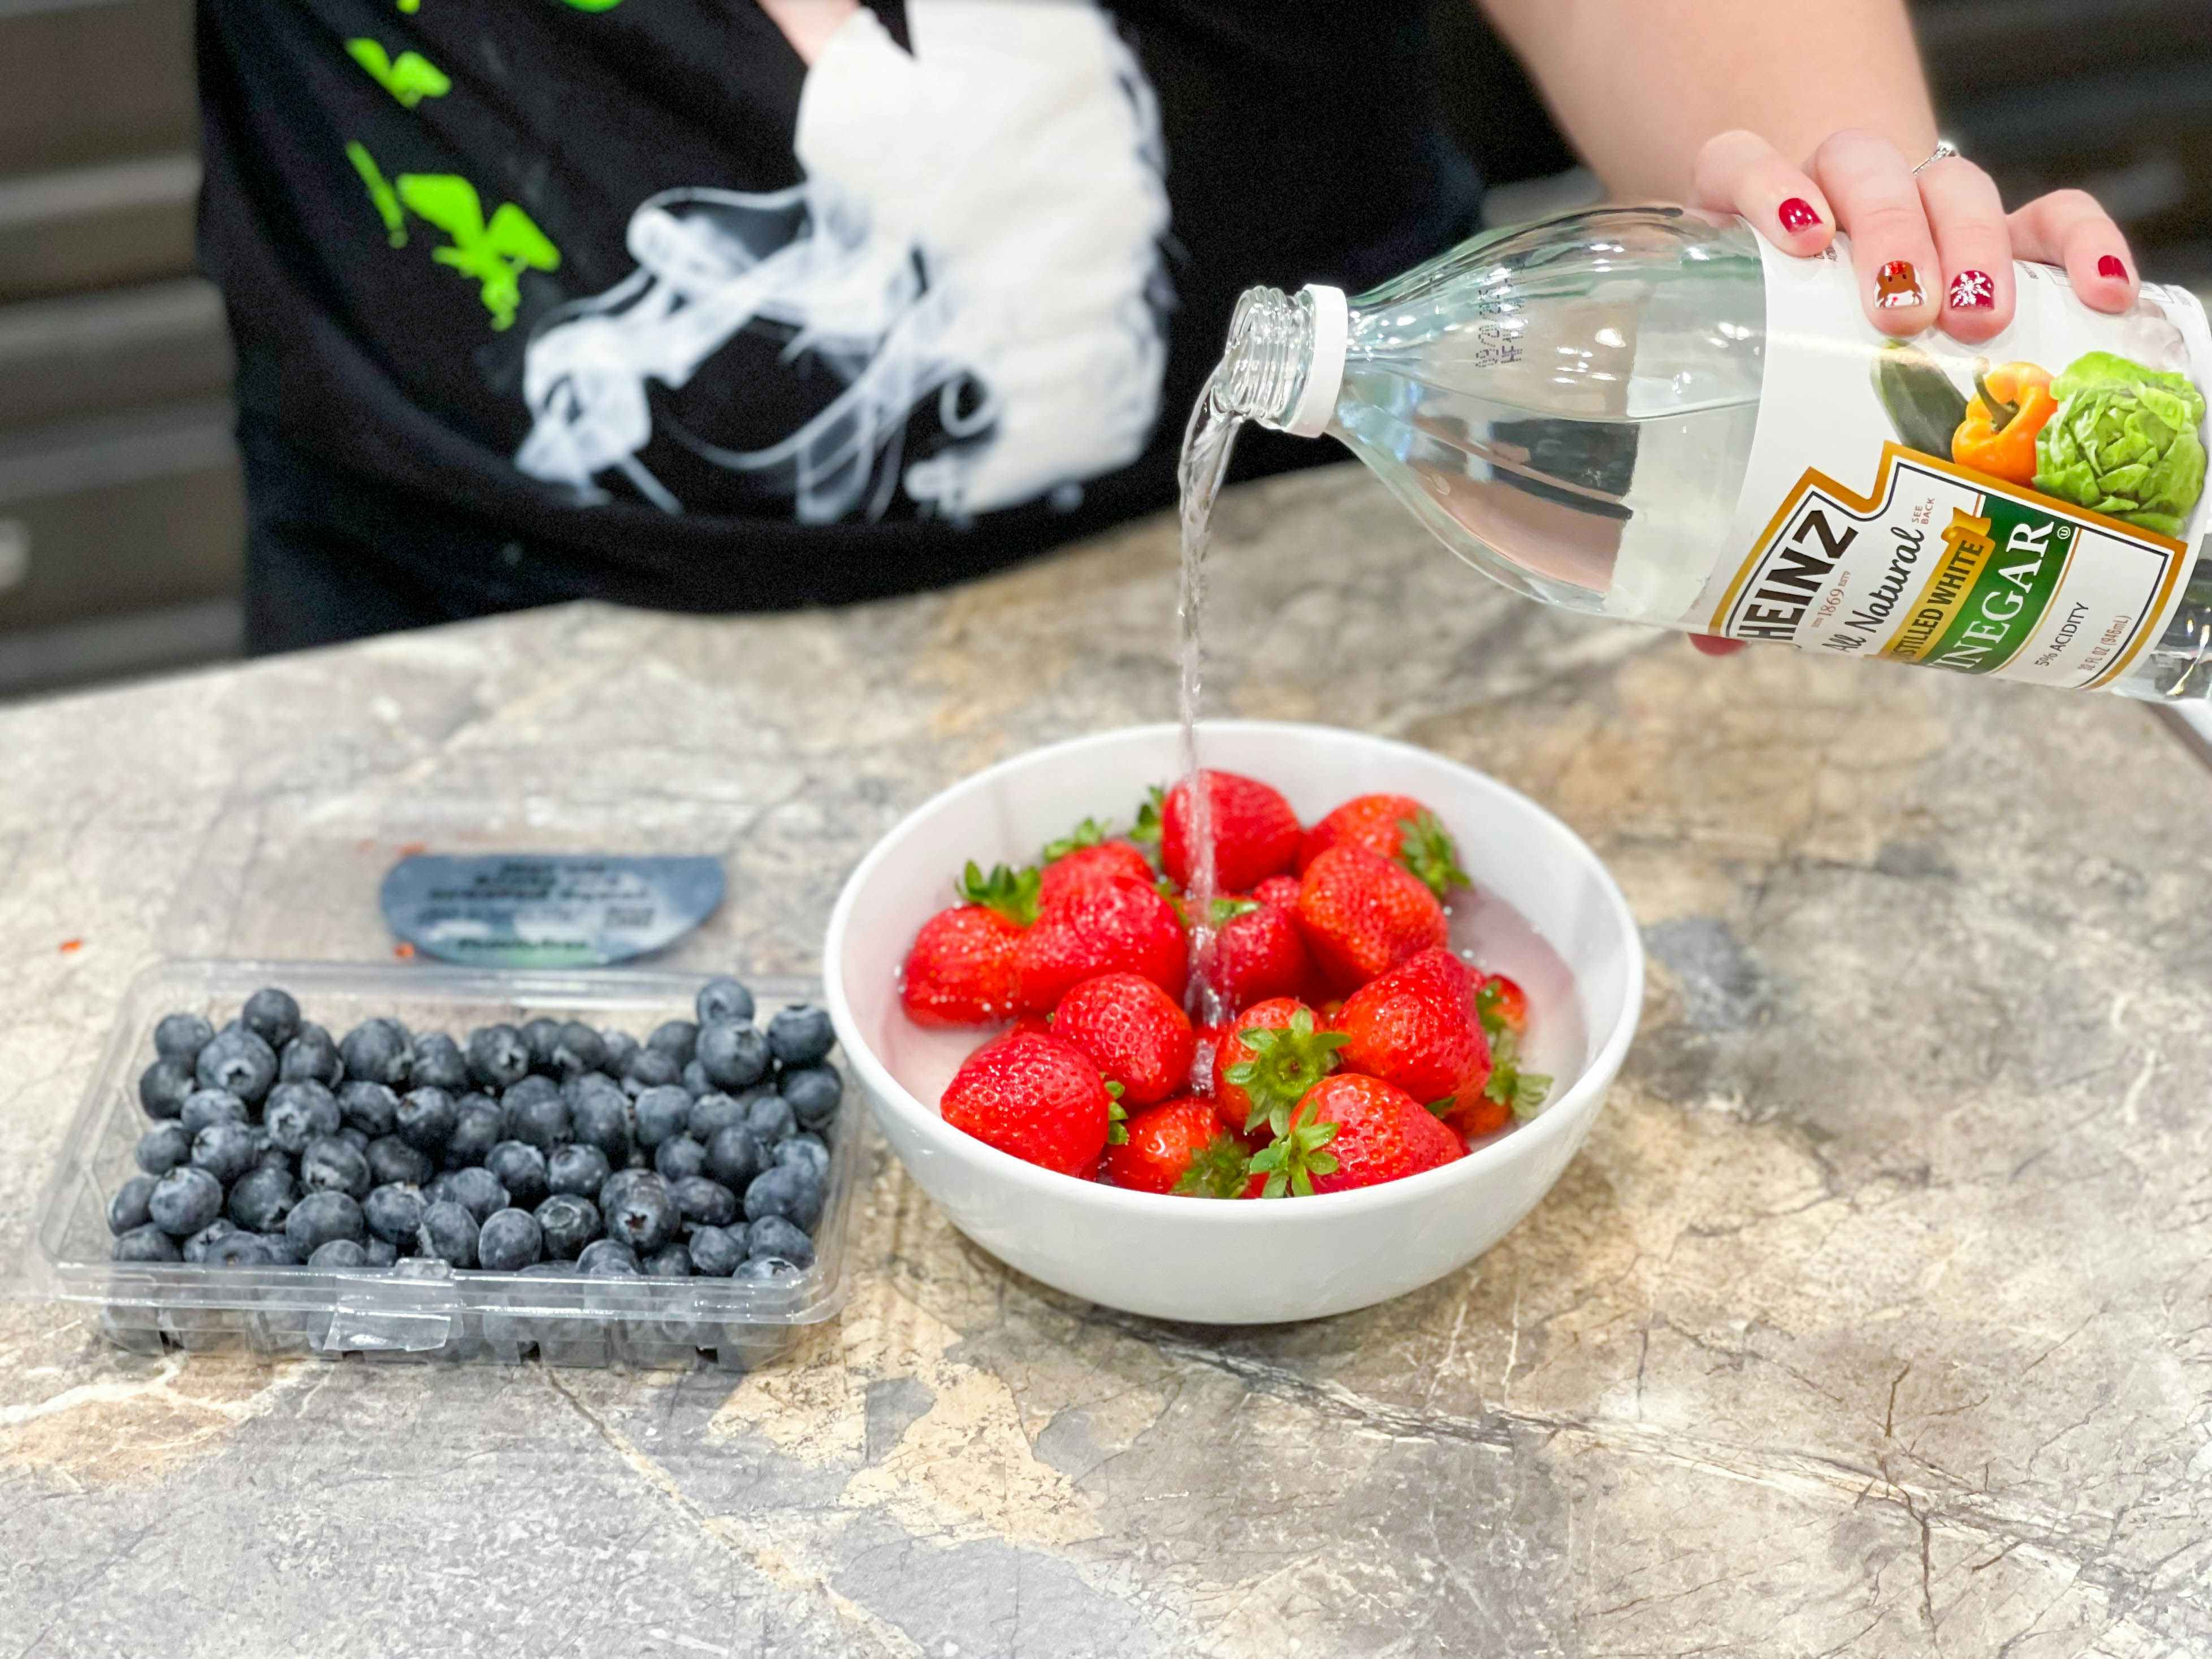 strawberries and blueberries with vinegar being poured on